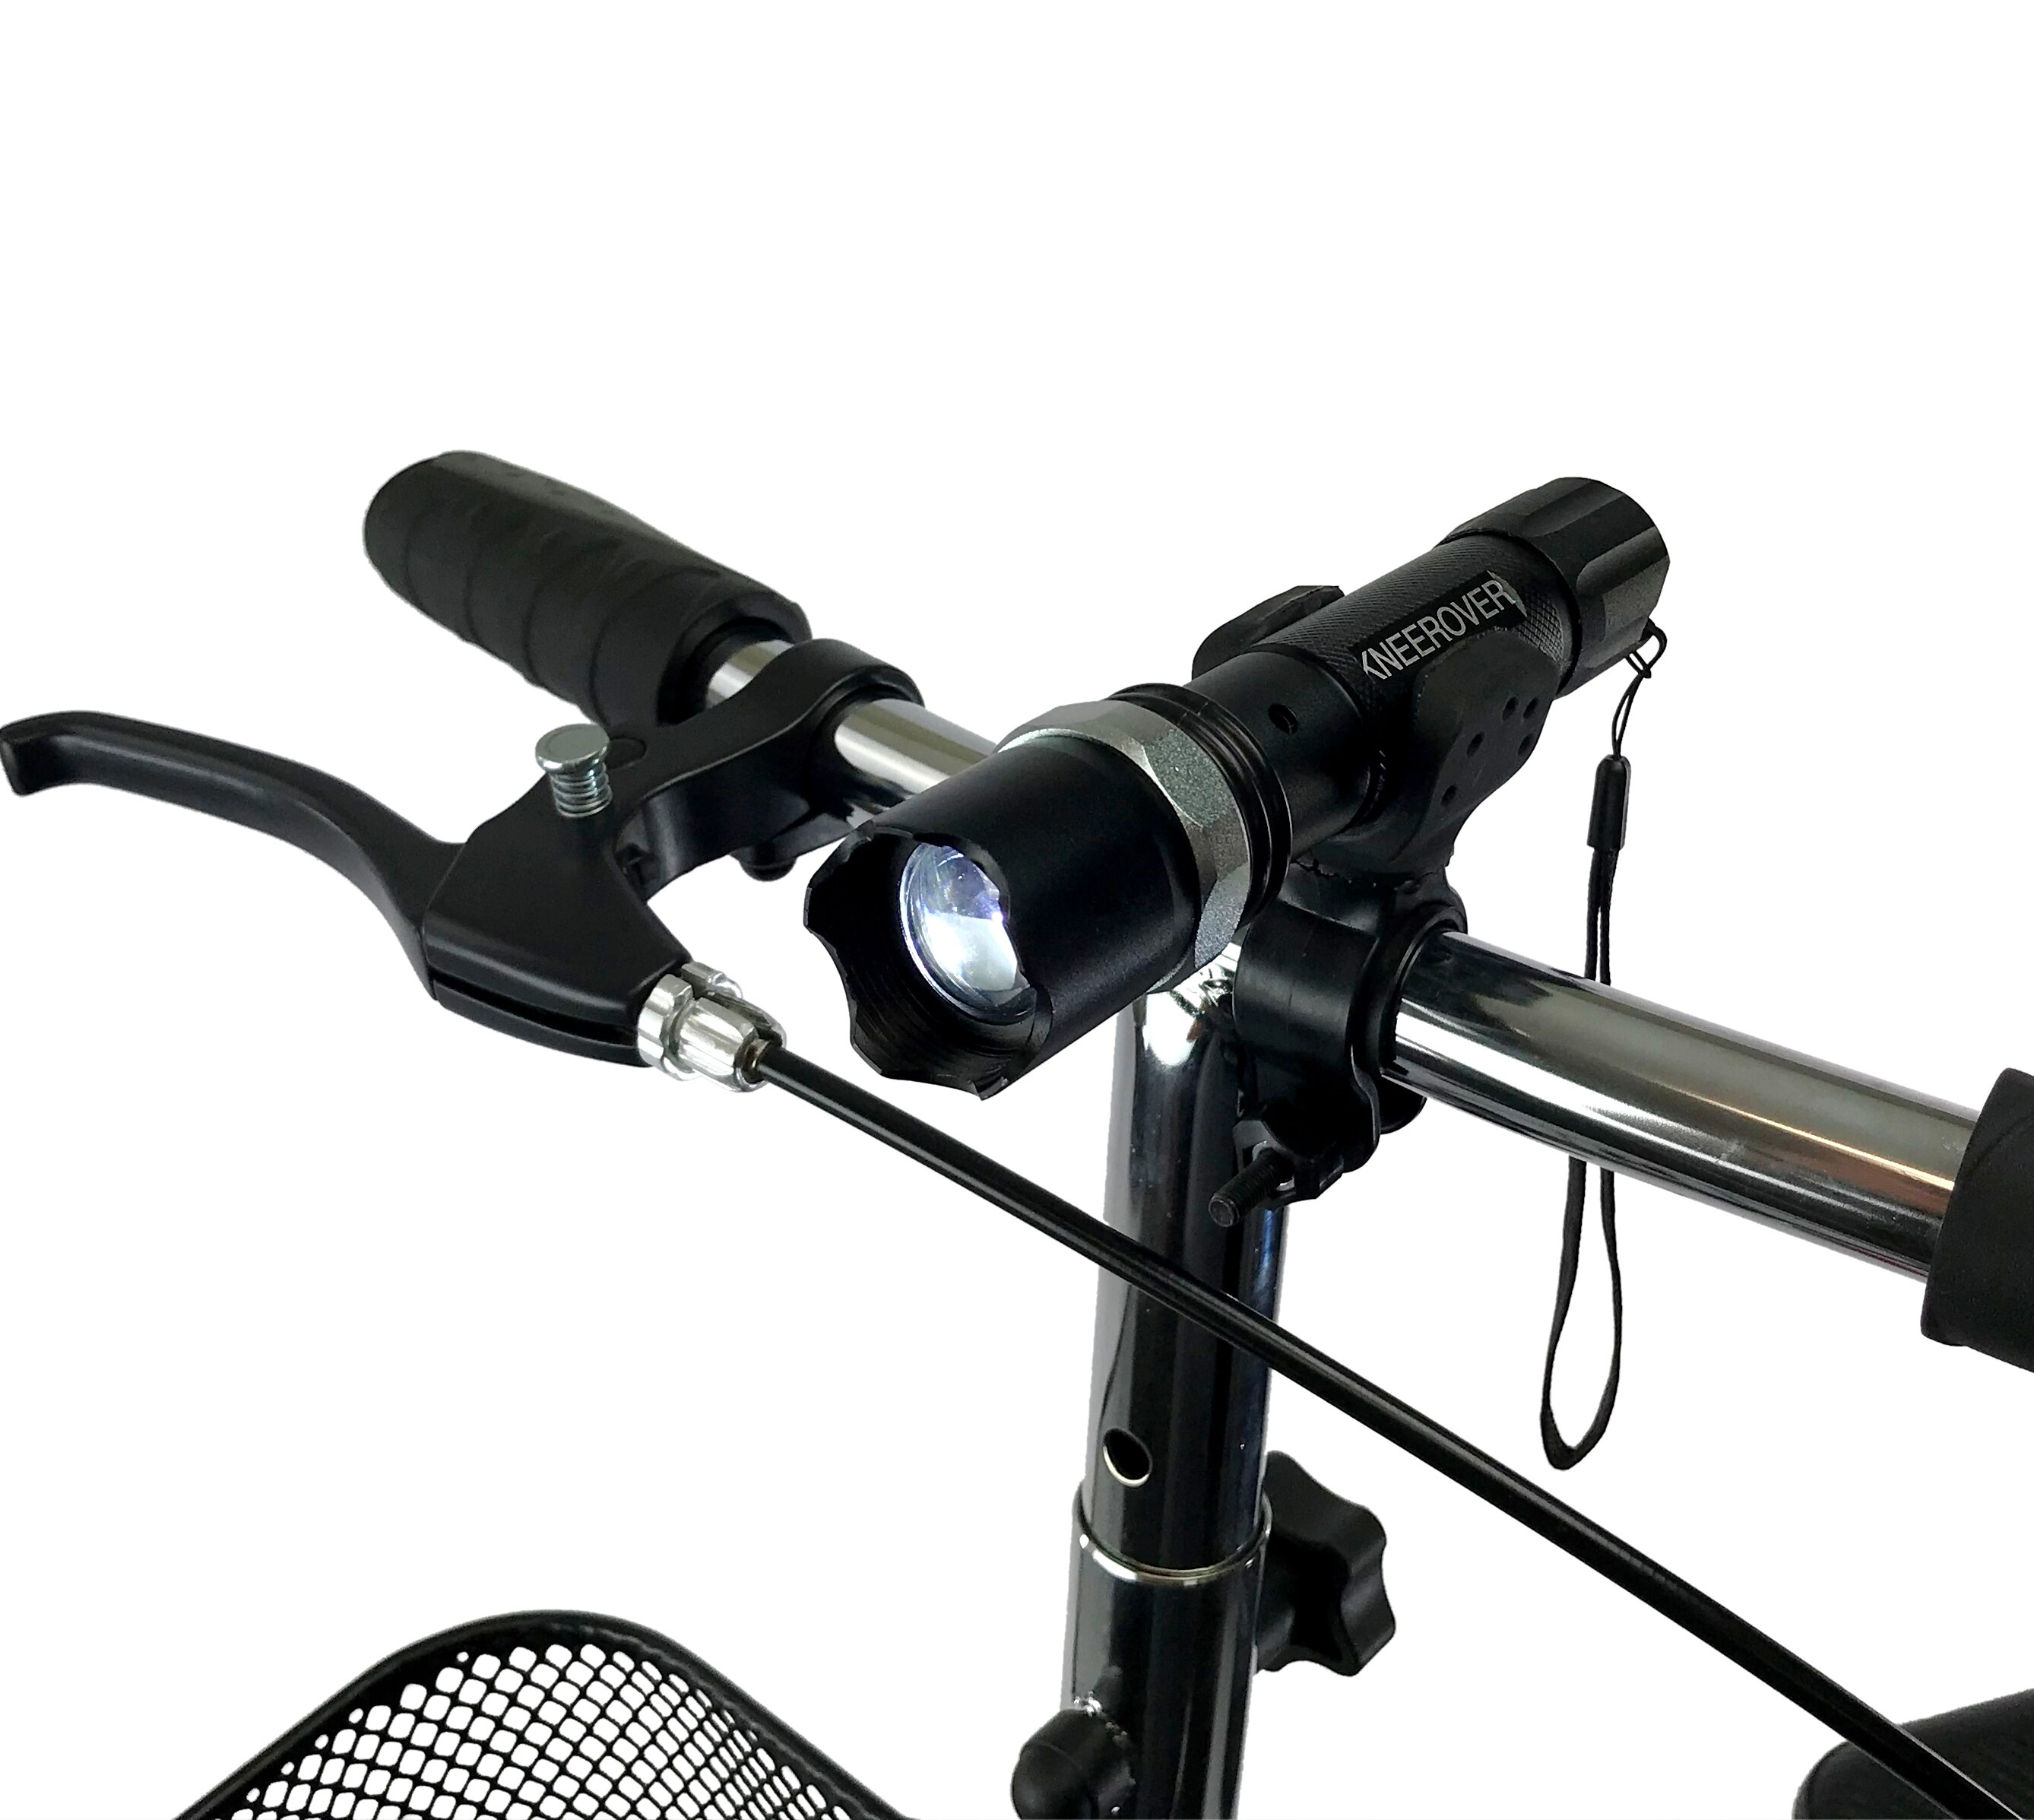 KneeRover Deluxe Super Bright LED Safety Headlight